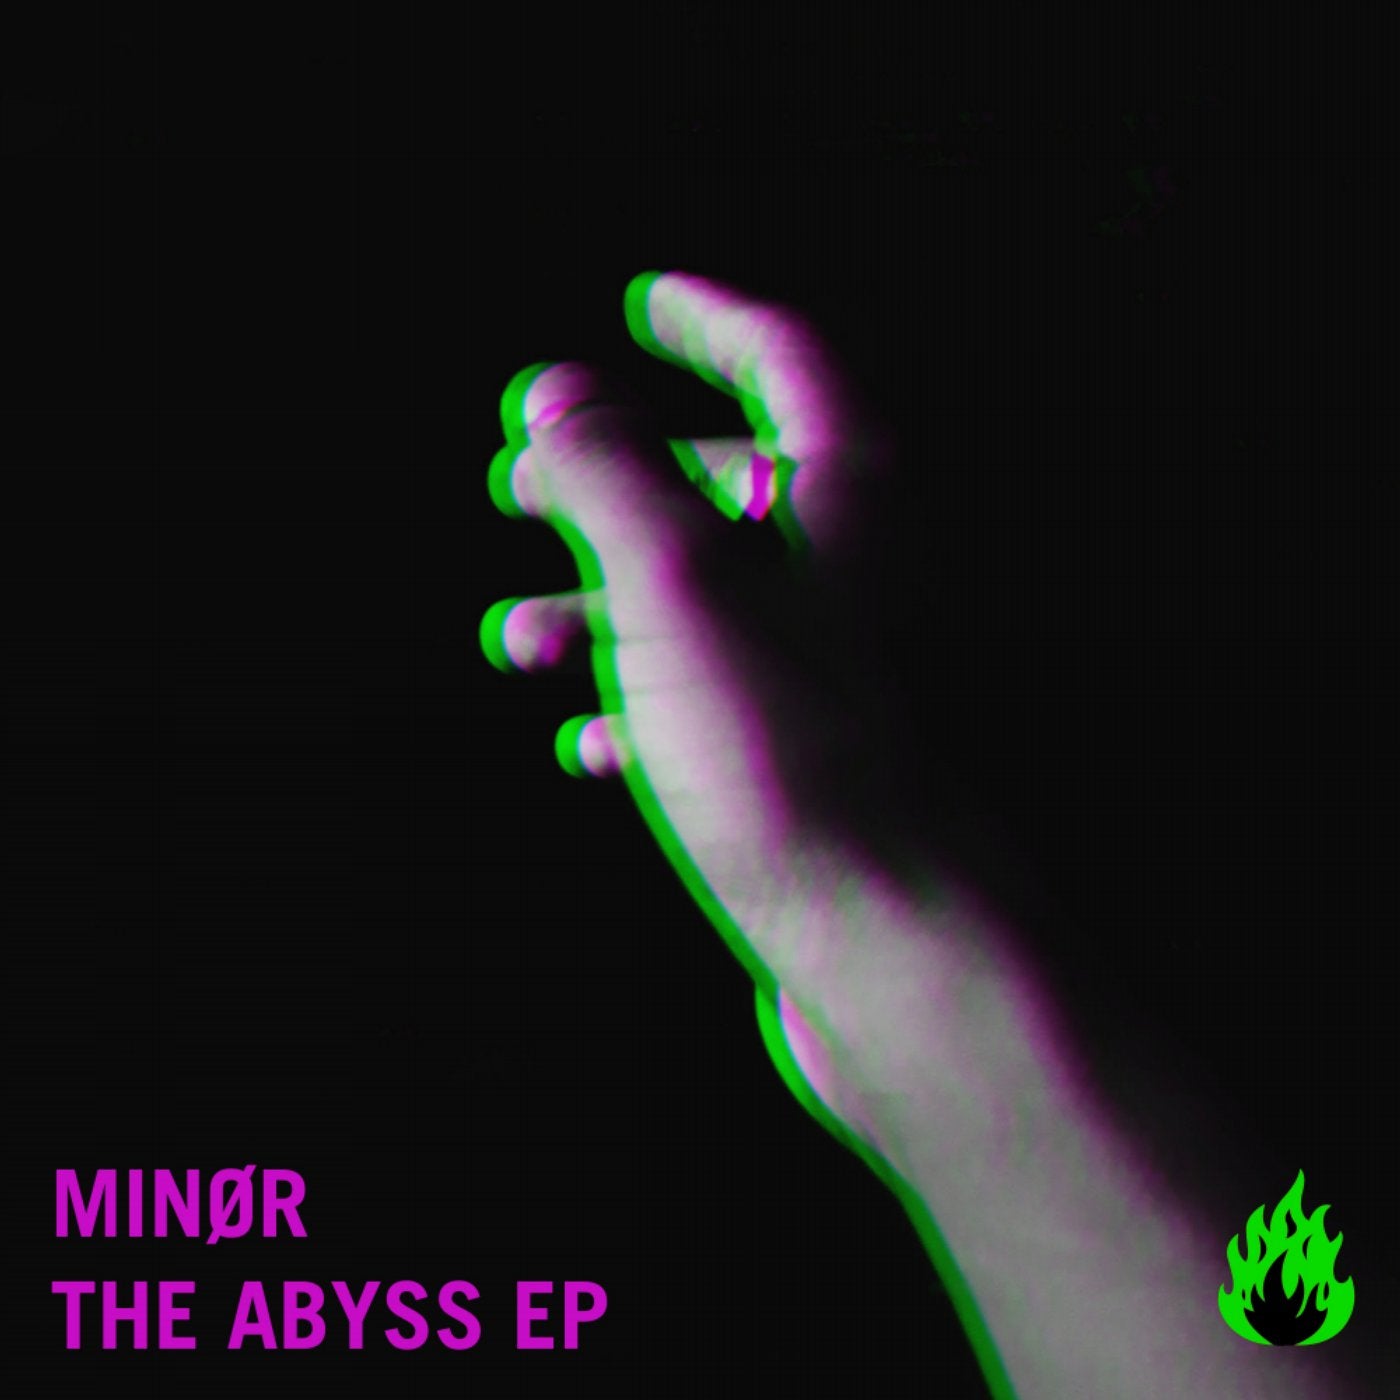 The Abyss EP